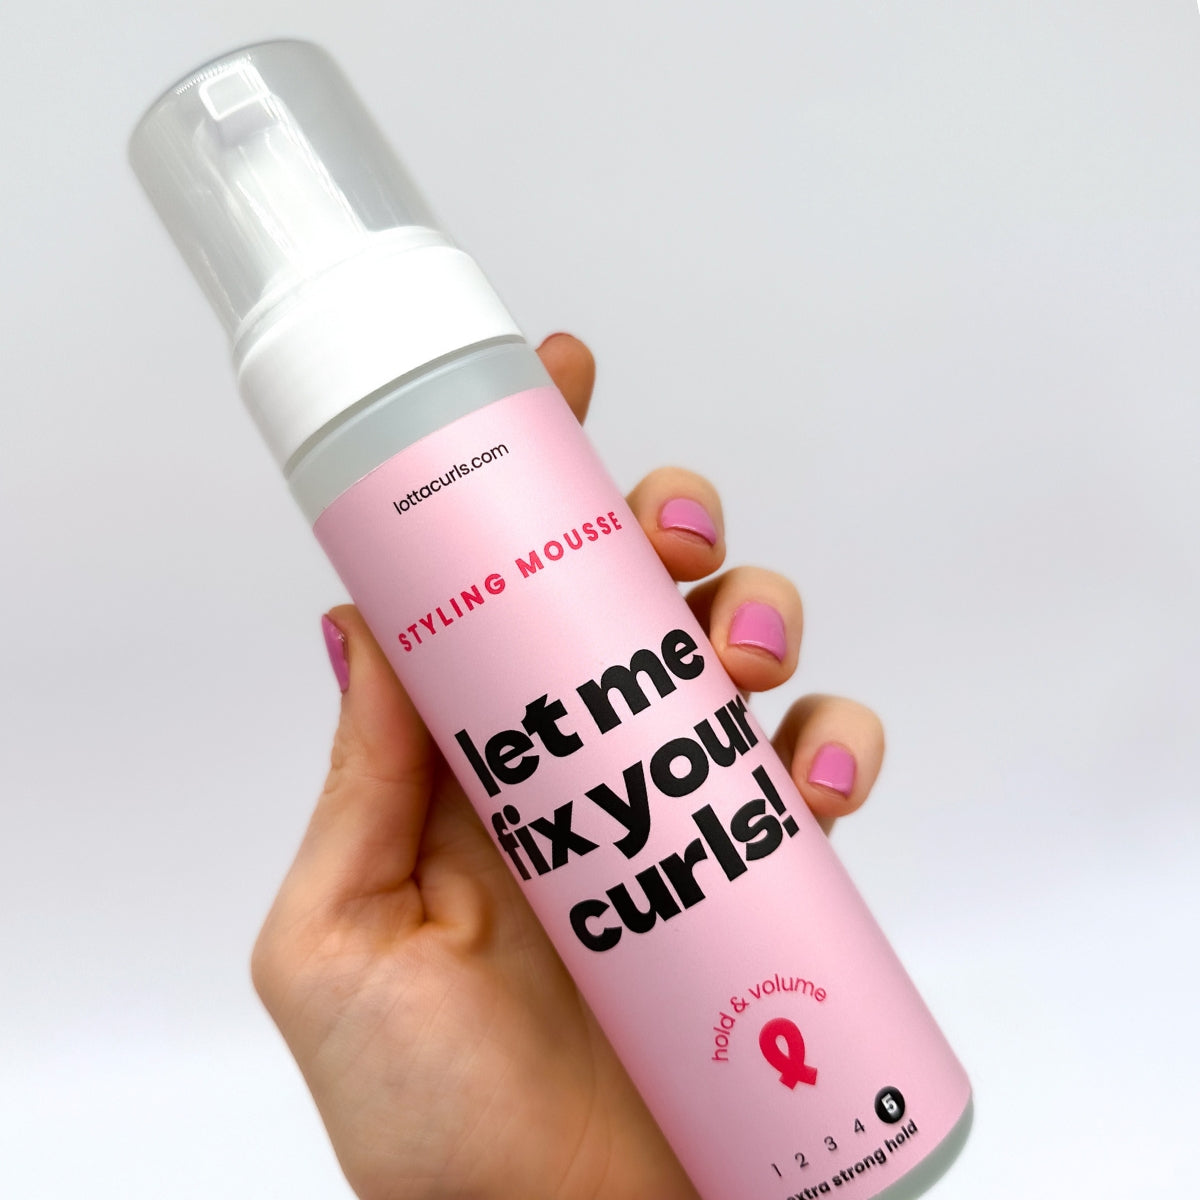 Styling Mousse 200ml